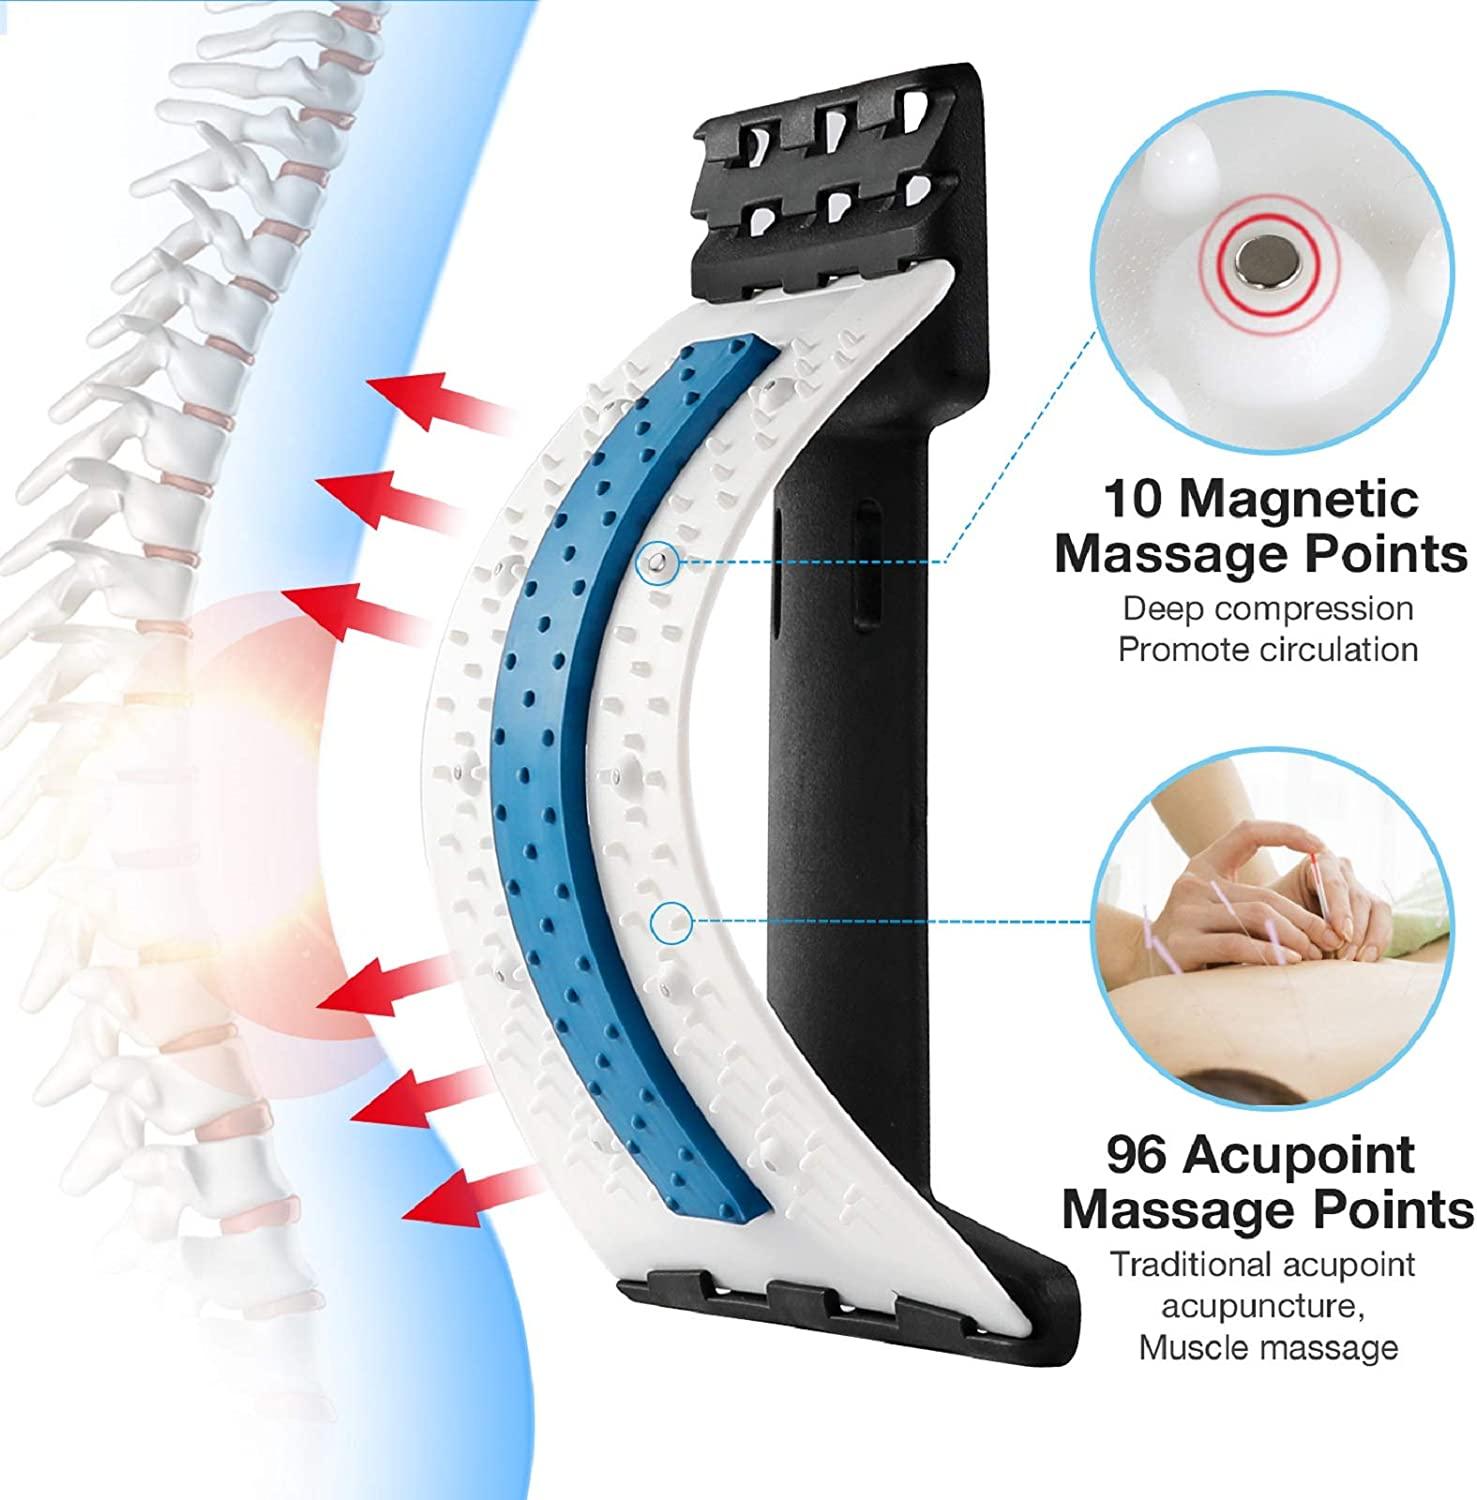 Back Stretcher, Lower Back Pain Relief Device with Magnet, Multi-Level Back  Cracker Back Massager, Lumbar Support Spine Board for Herniated Disc,  Sciatica, Scoliosis 